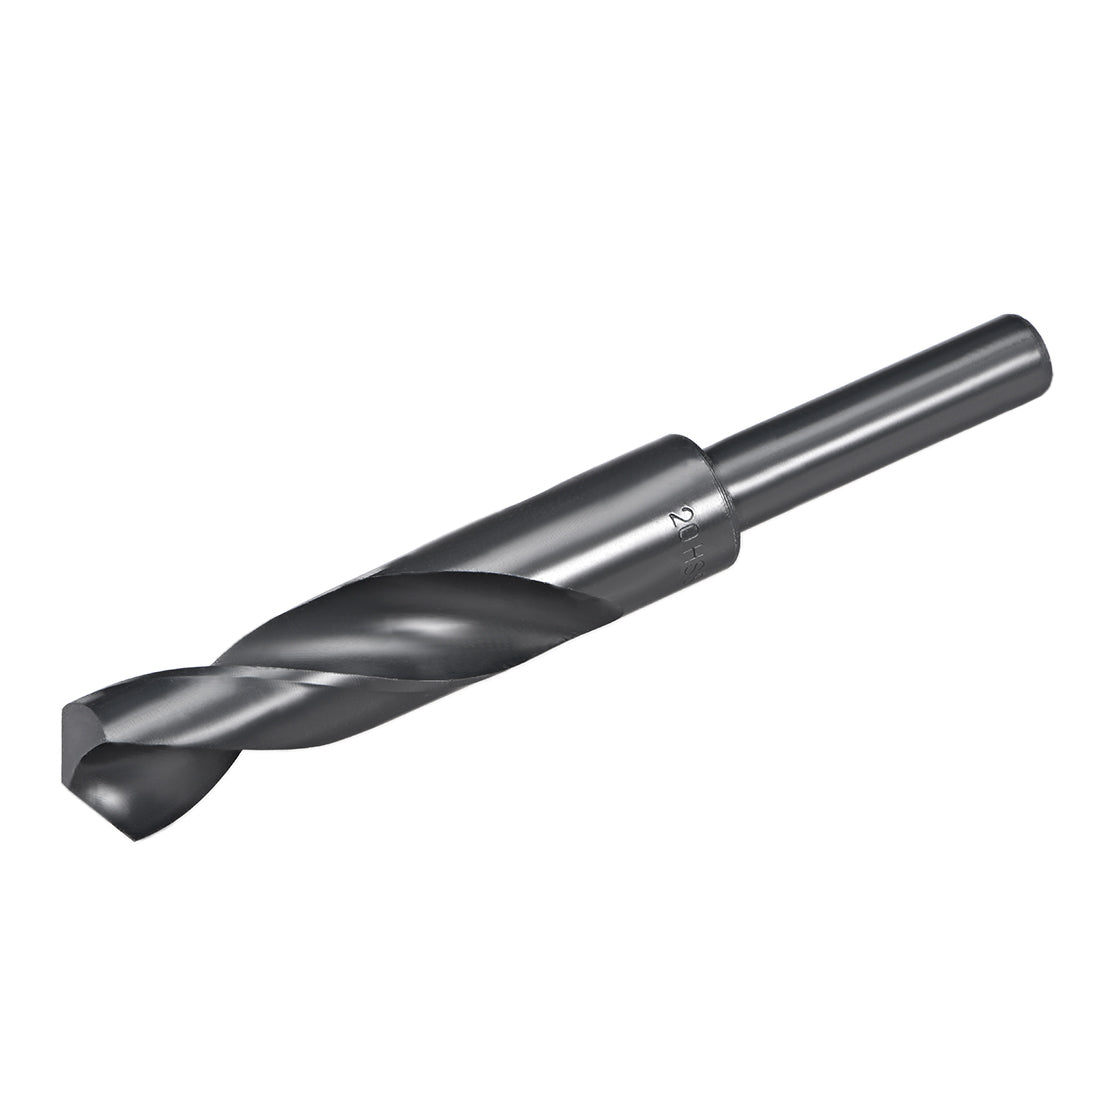 uxcell Uxcell Reduced Shank Drill Bit 20mm HSS 6542 Black Oxide with 1/2 Inch Straight Shank